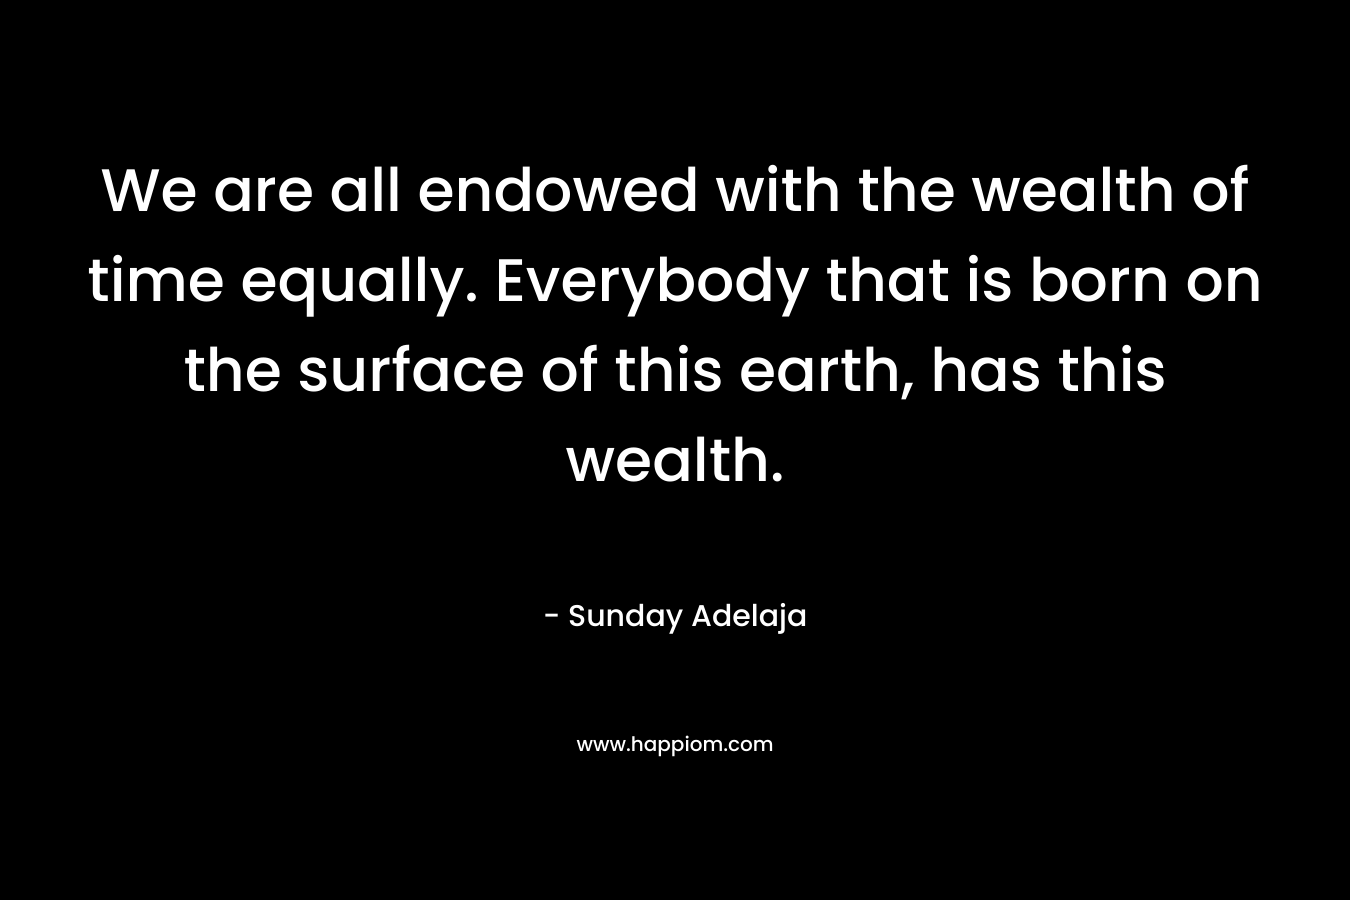 We are all endowed with the wealth of time equally. Everybody that is born on the surface of this earth, has this wealth. – Sunday Adelaja